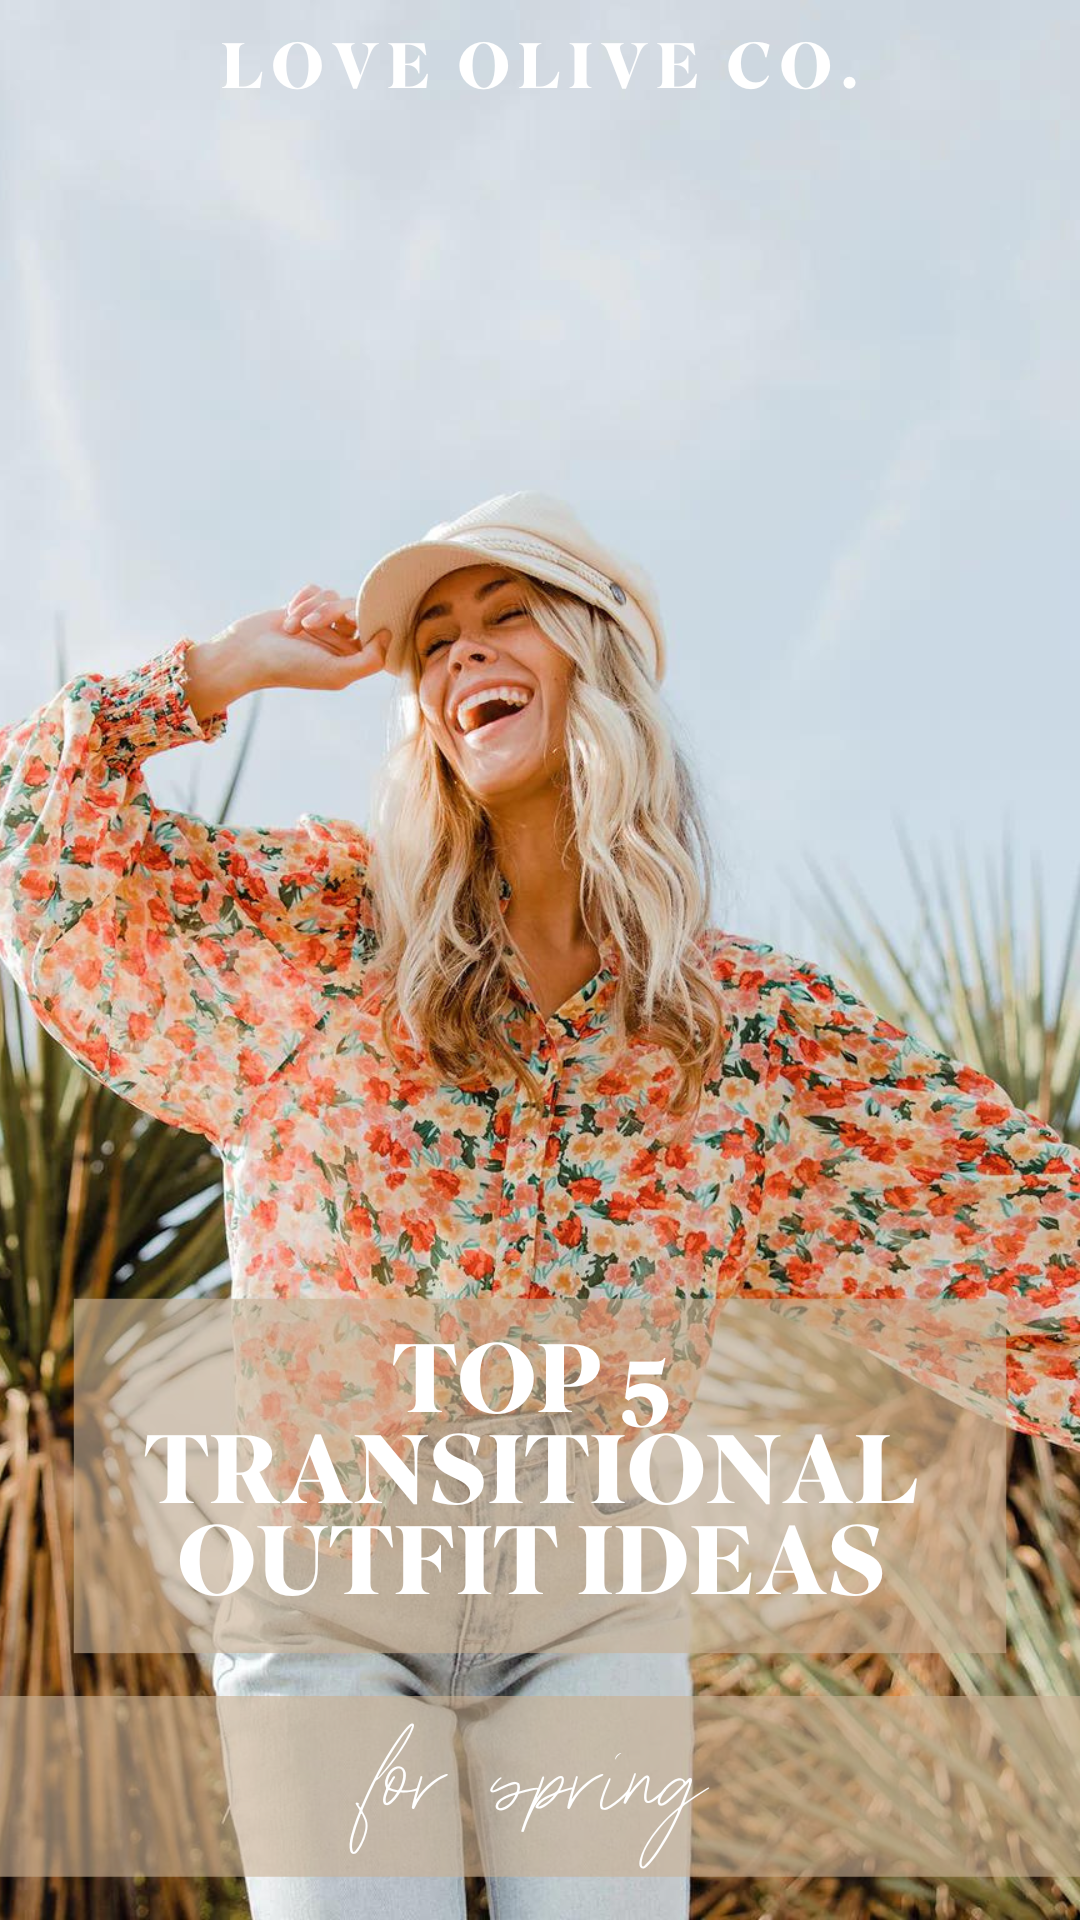 top 5 transitional outfit ideas for spring. www.loveoliveco.com